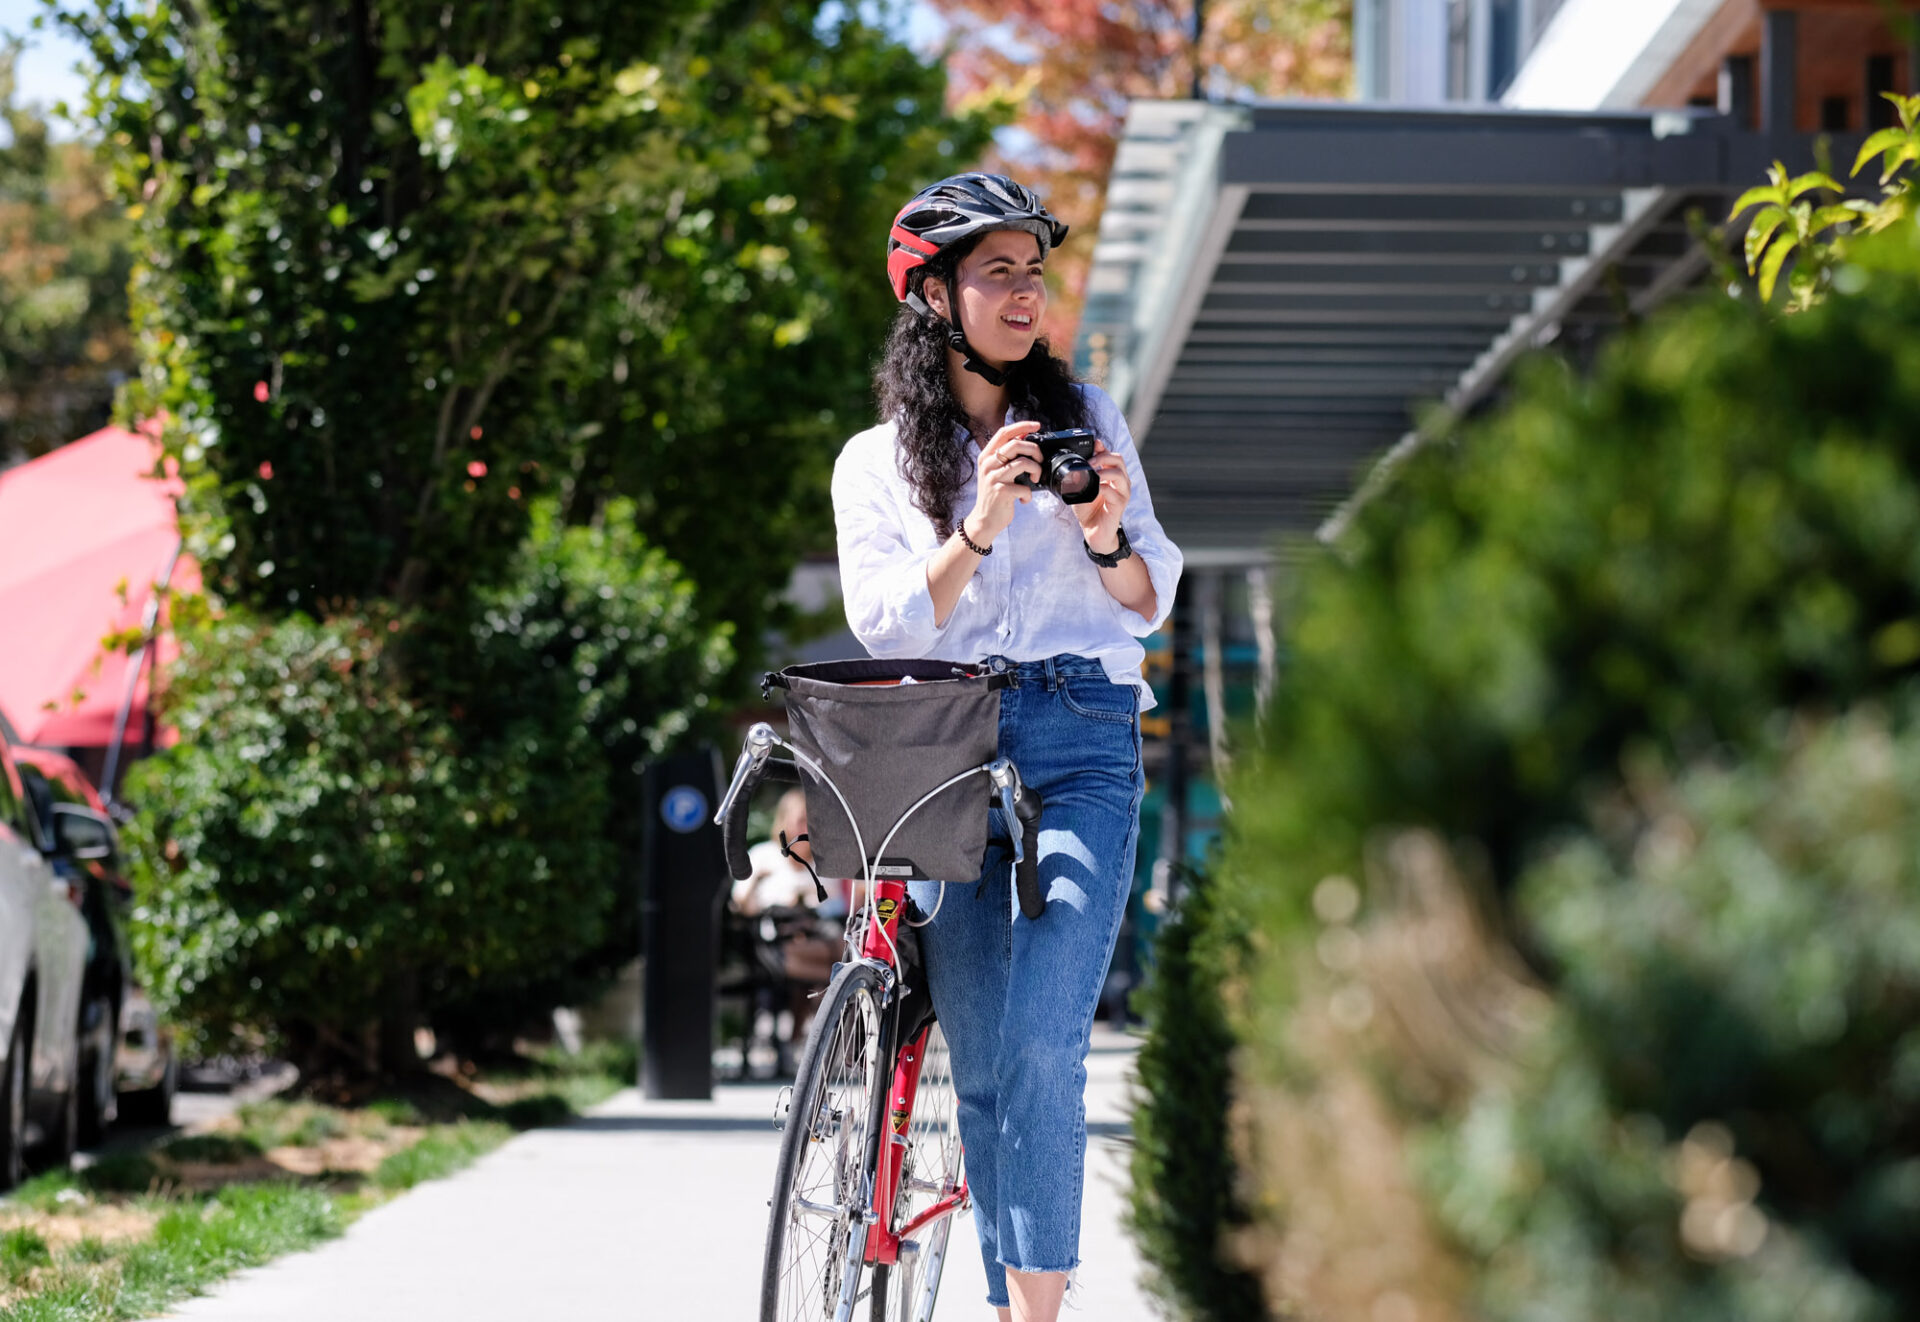 A woman composes a photo with her camera as she stands with her bike on a Vancouver street.